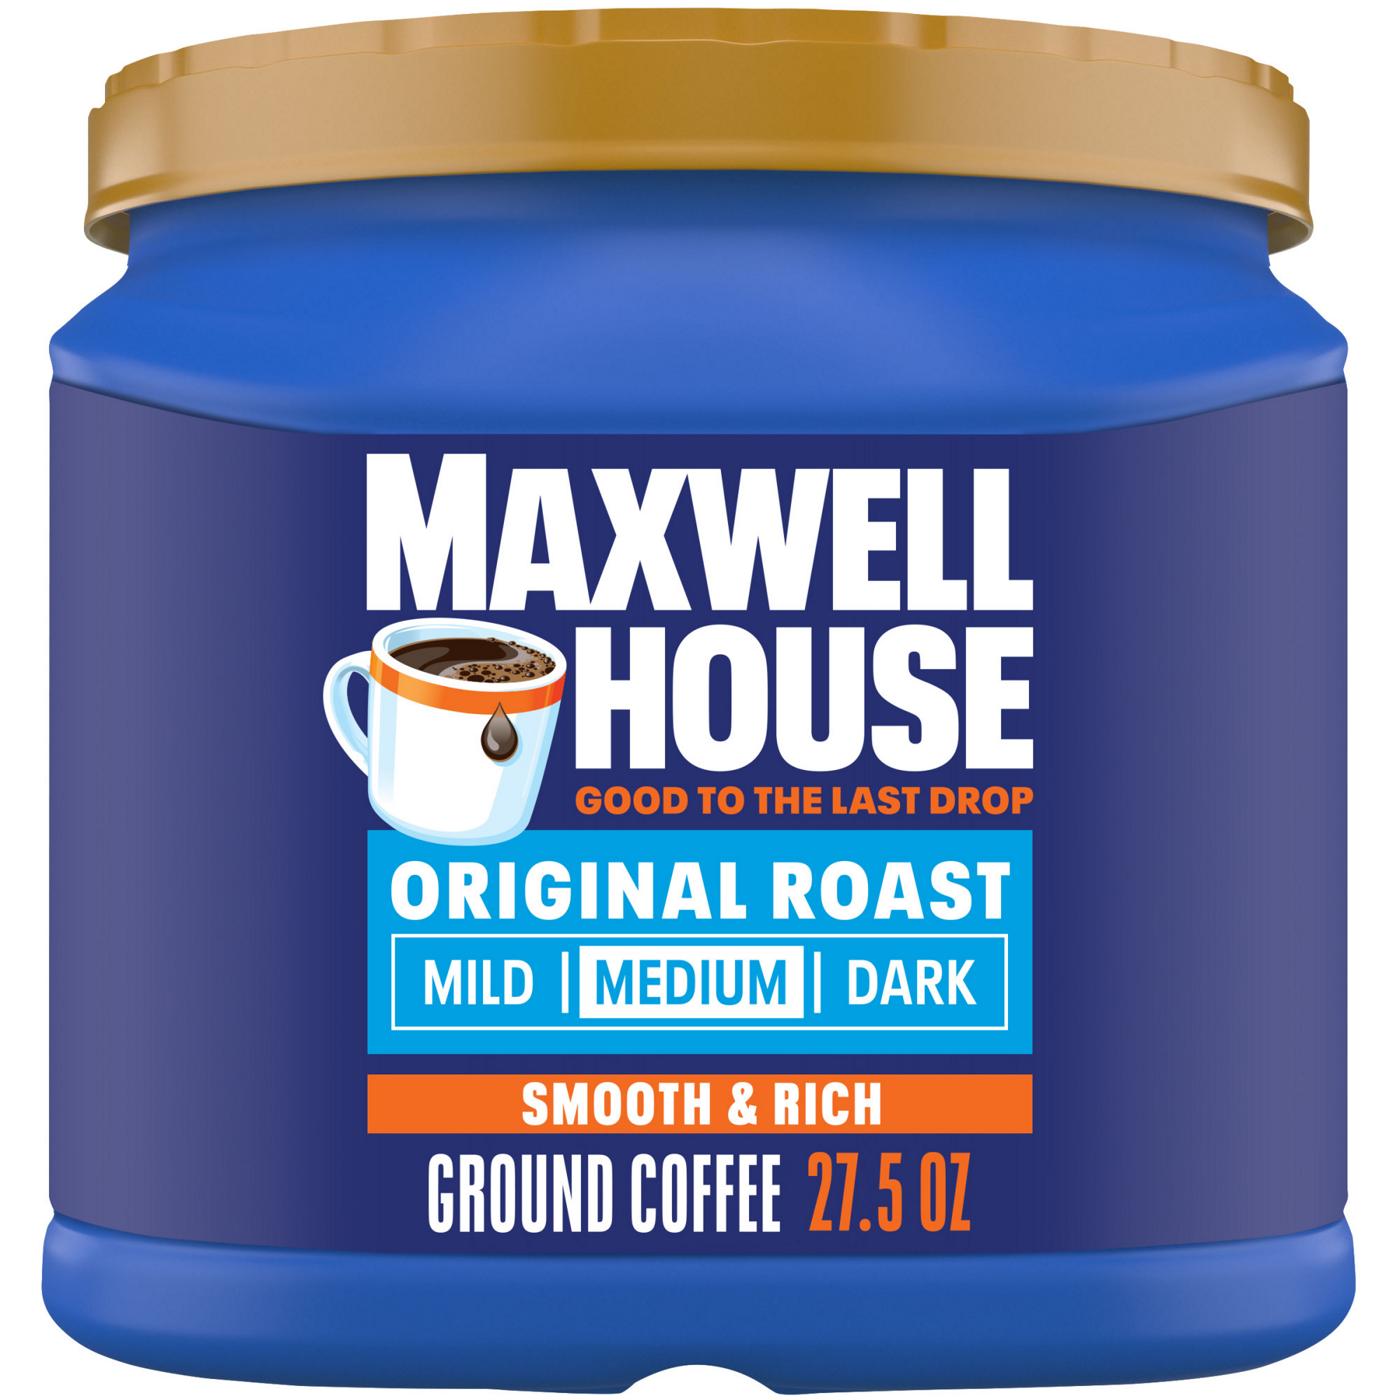 Maxwell House Original Roast Ground Coffee, 27.5 oz Canister; image 1 of 13